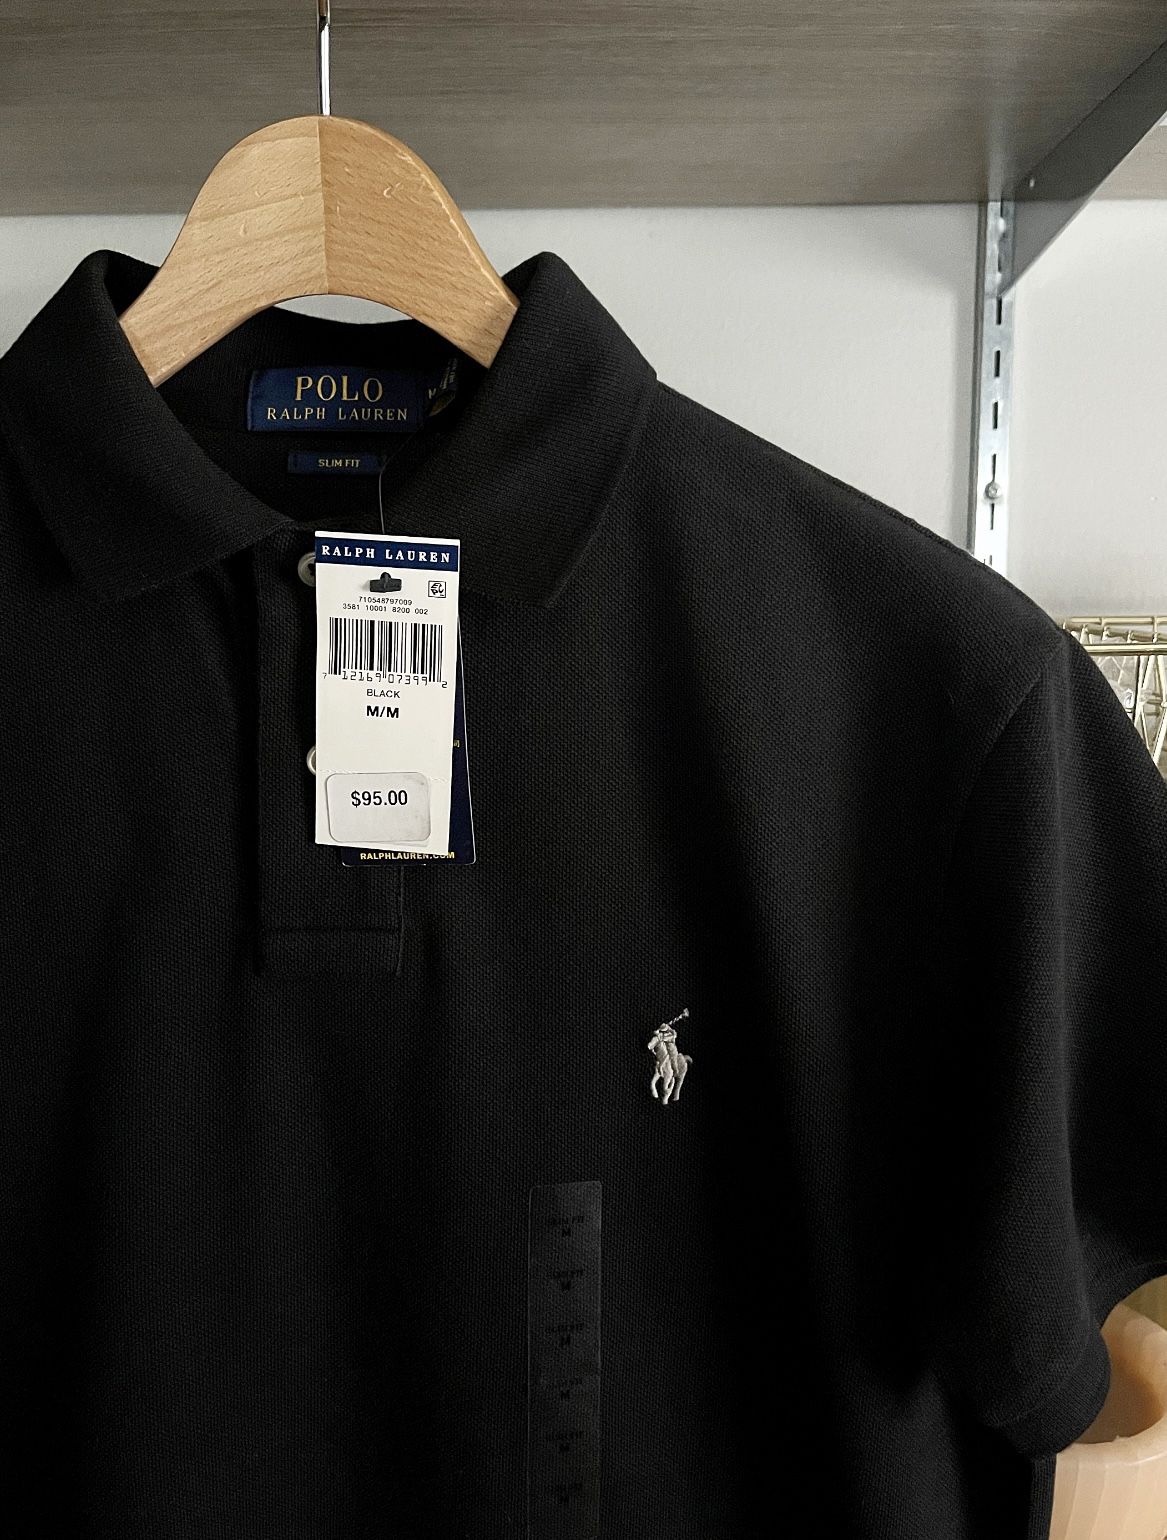 New! Mens Polo Ralph Lauren slim fit shirt size M retail $95 Brand new Color Black with classic logo. Short sleeve 2 button polo shirt.